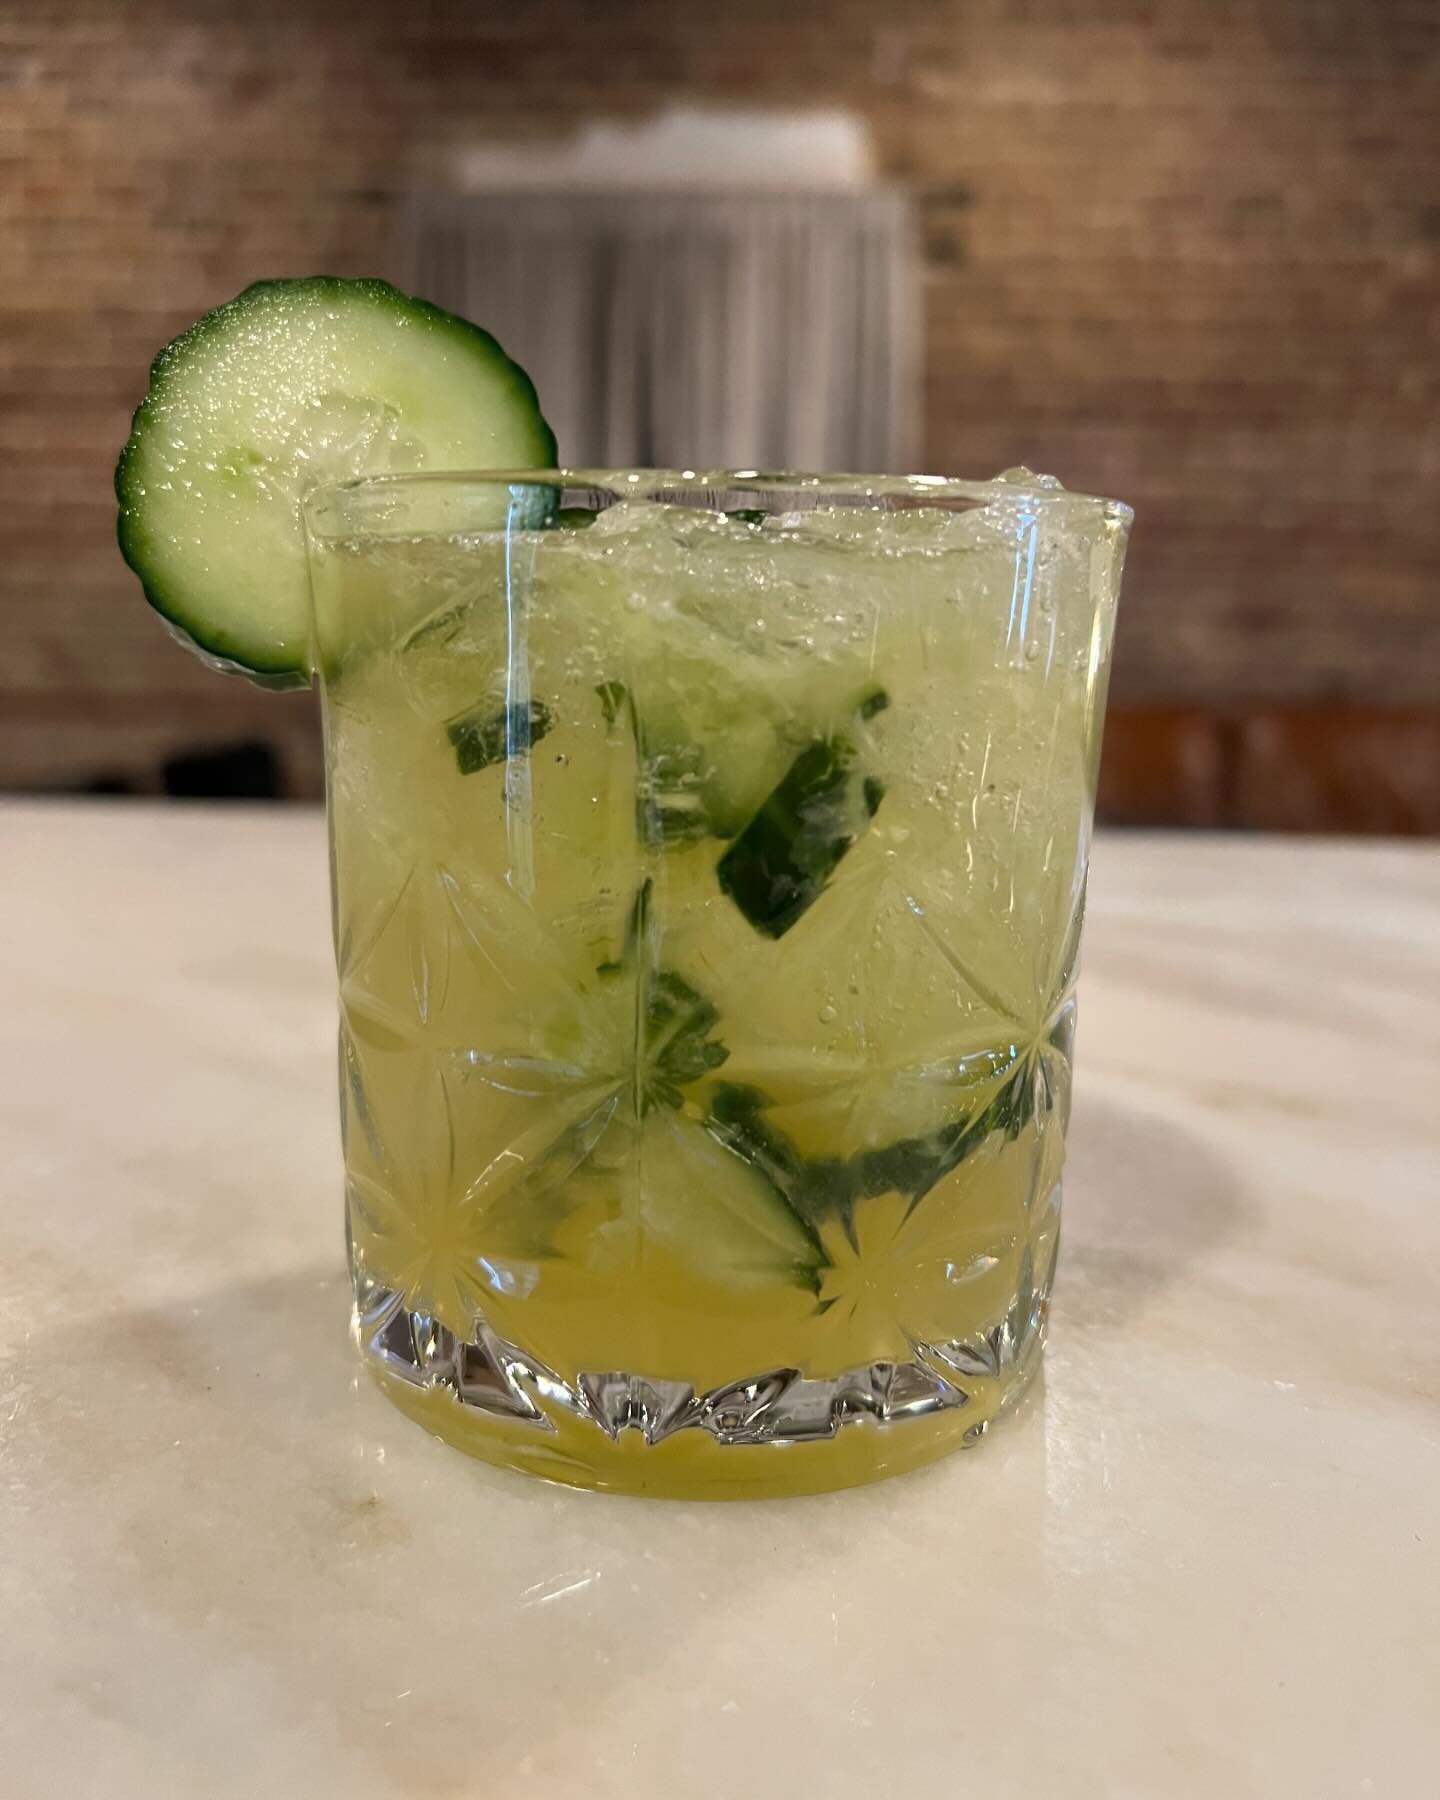 Our monthly cocktail special &ldquo;The Ides of March&rdquo; is making its debut today! ☘️ Jameson Irish Whiskey, St. Germain, Lime, Cucumber, simple syrup. Available on March only! TONIGHT from 5-7 Nash Nunnery will be in for his book signing. Happy